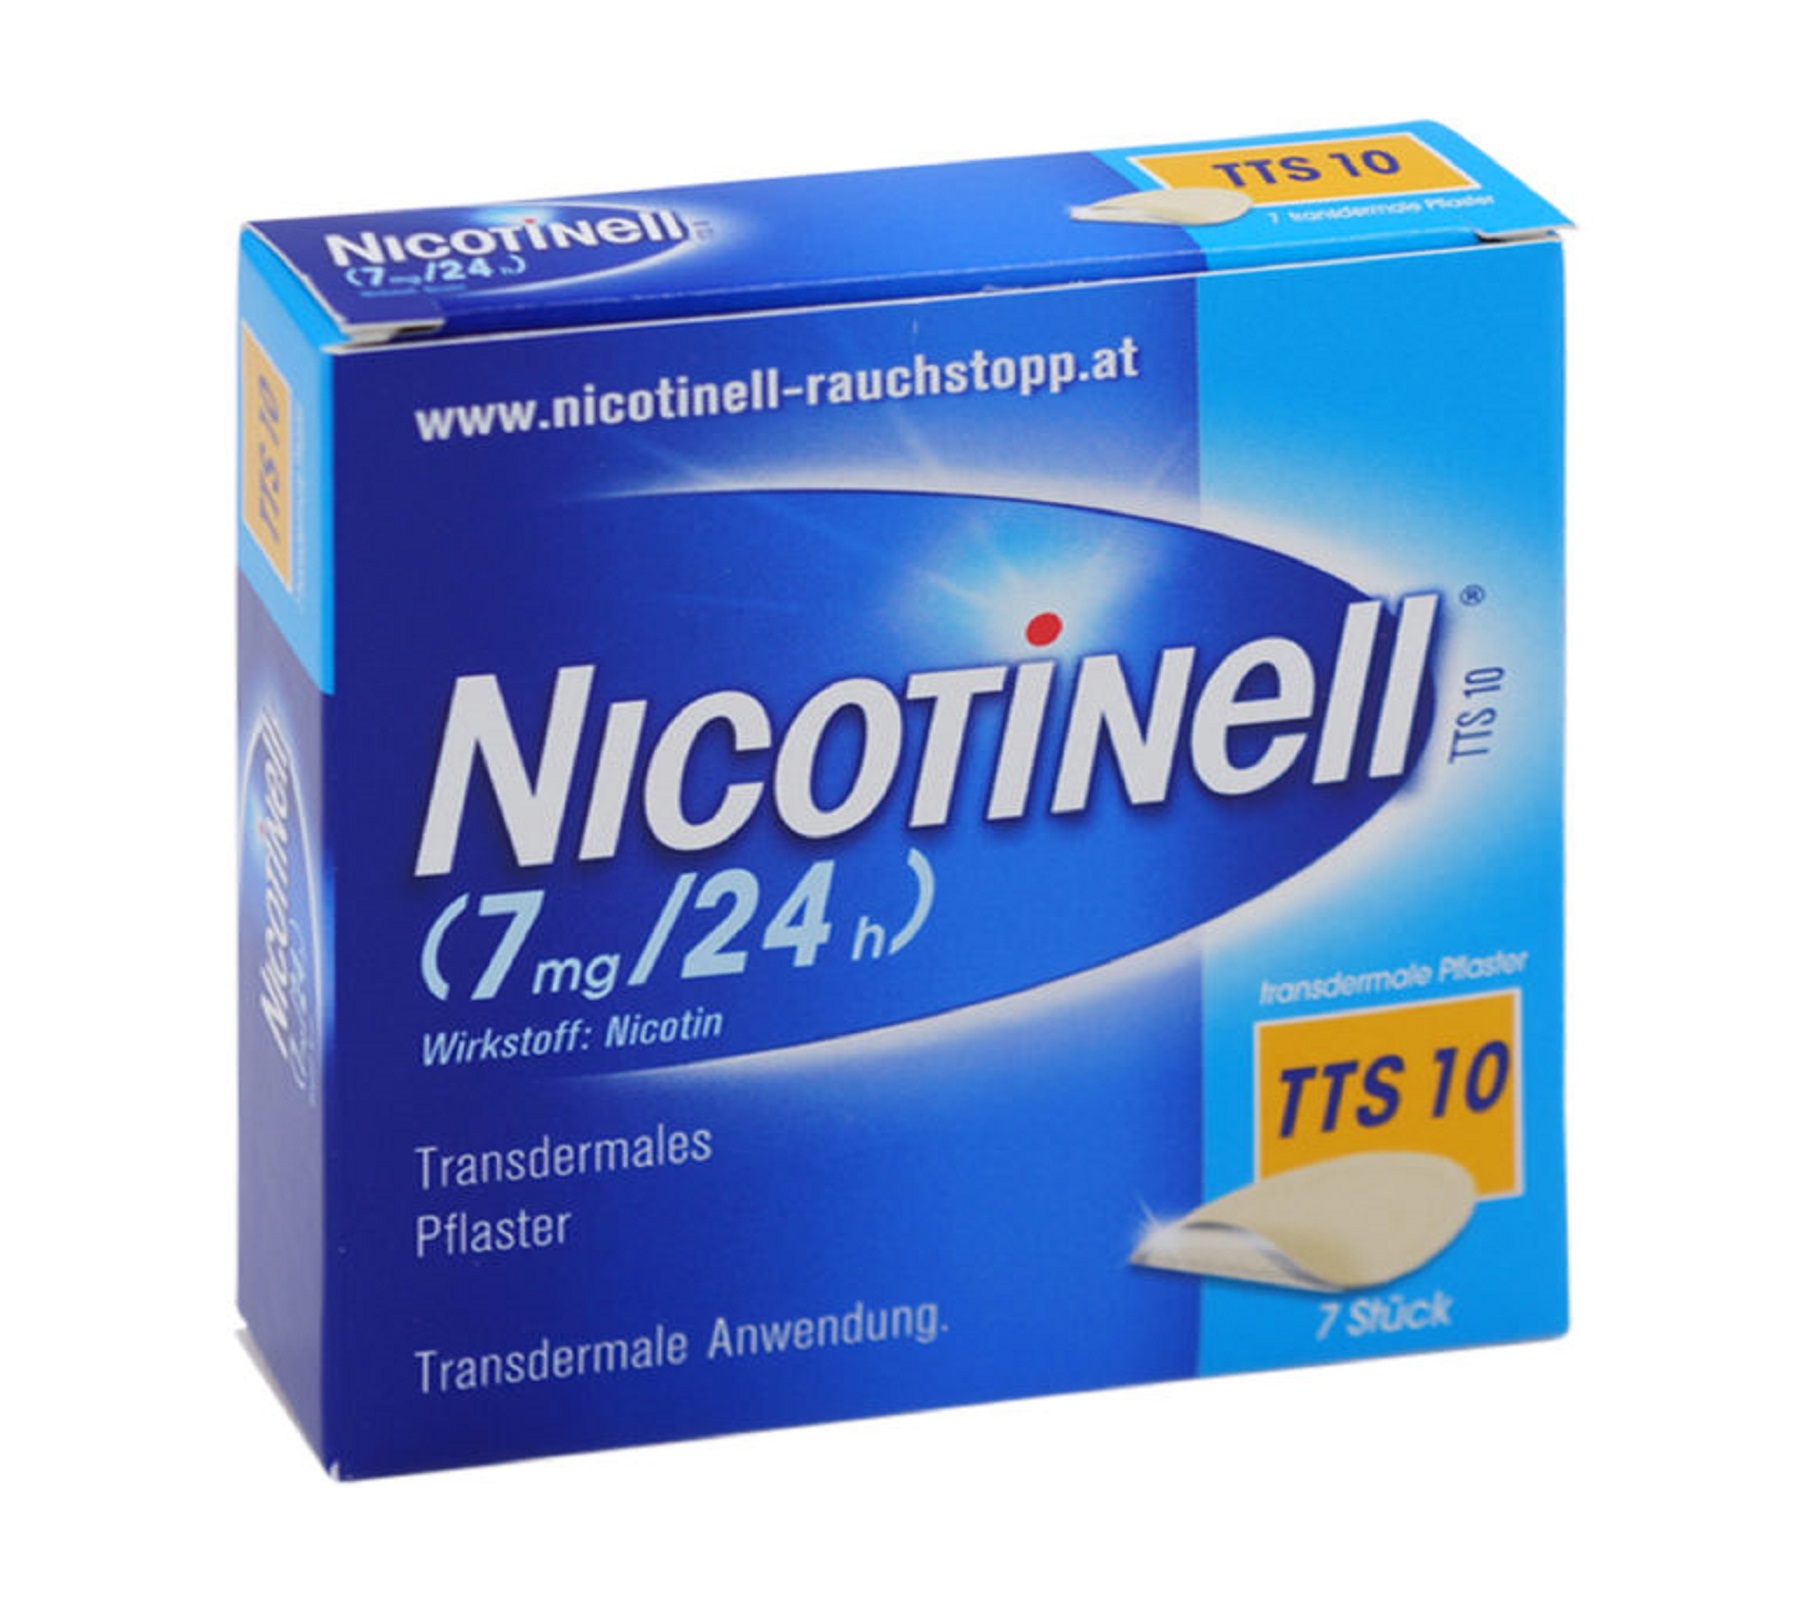 Nicotinell TTS 10 (7 mg/24 h) - transdermale Pflaster